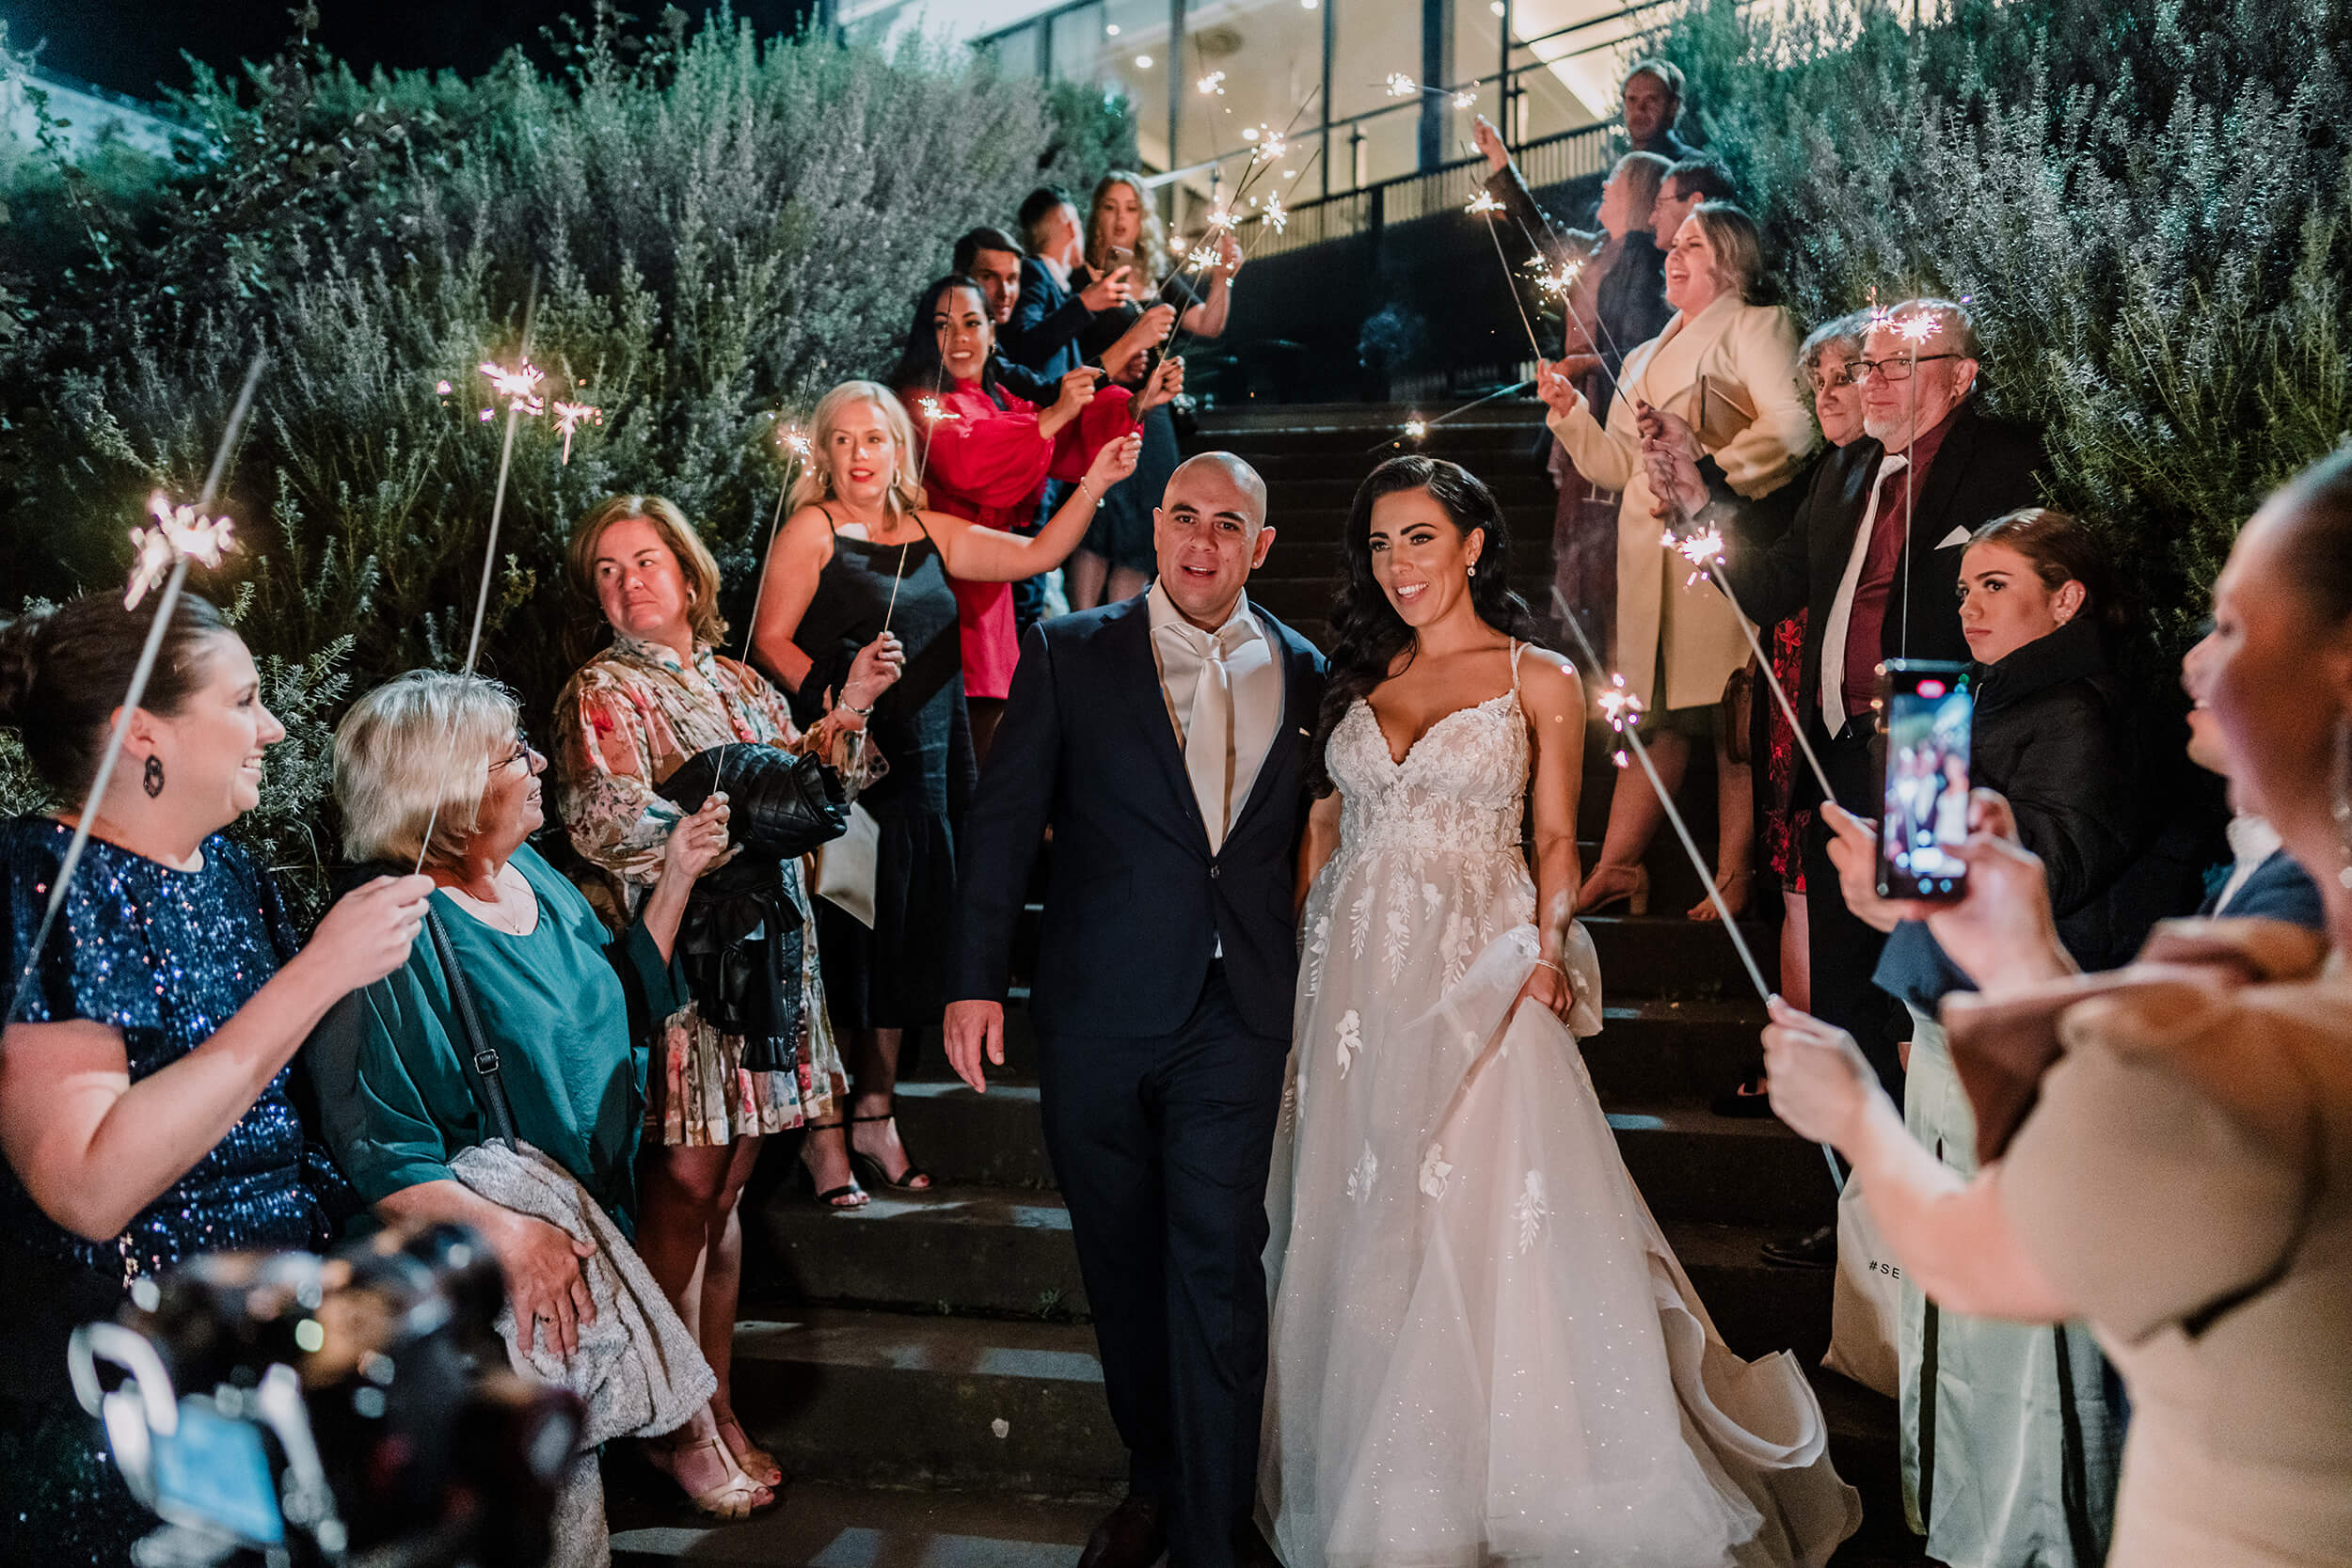 Lovely couple walking down the stairway while guests are holding sparklers, captured by Lowina Blackman of black avenue productions